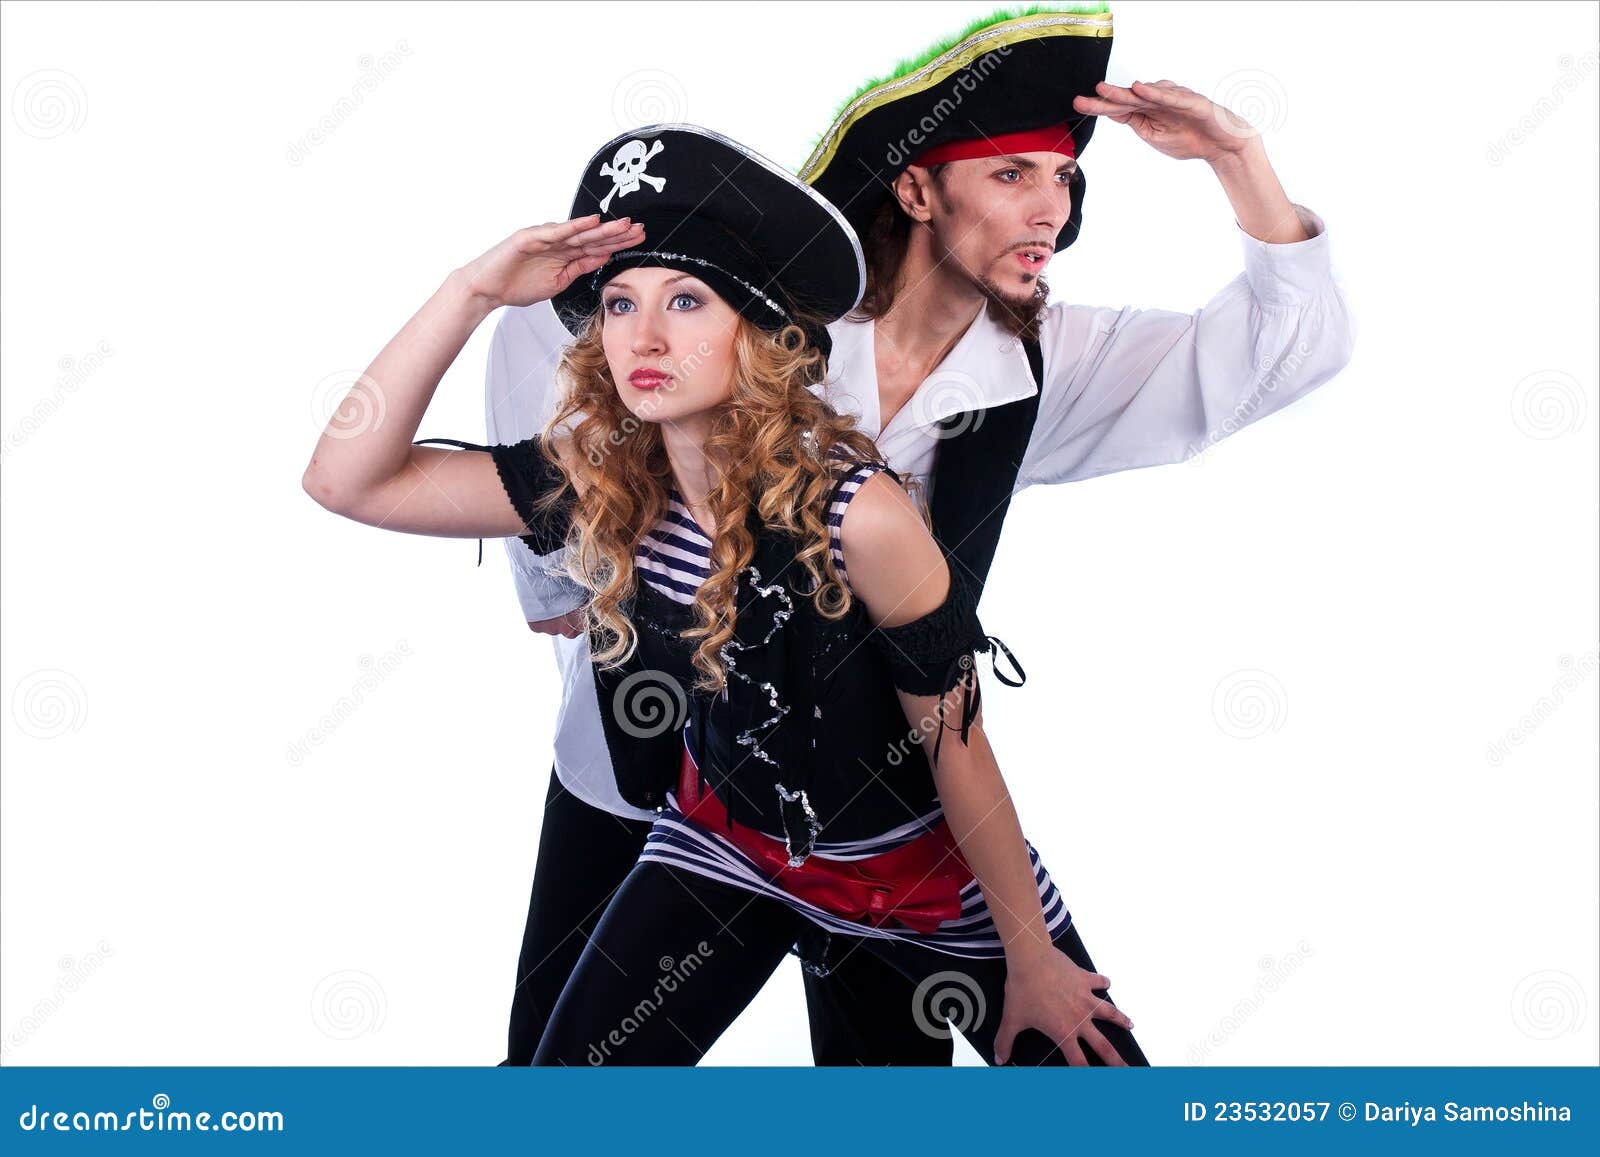 12 436 Pirates Photos Free Royalty Free Stock Photos From Dreamstime